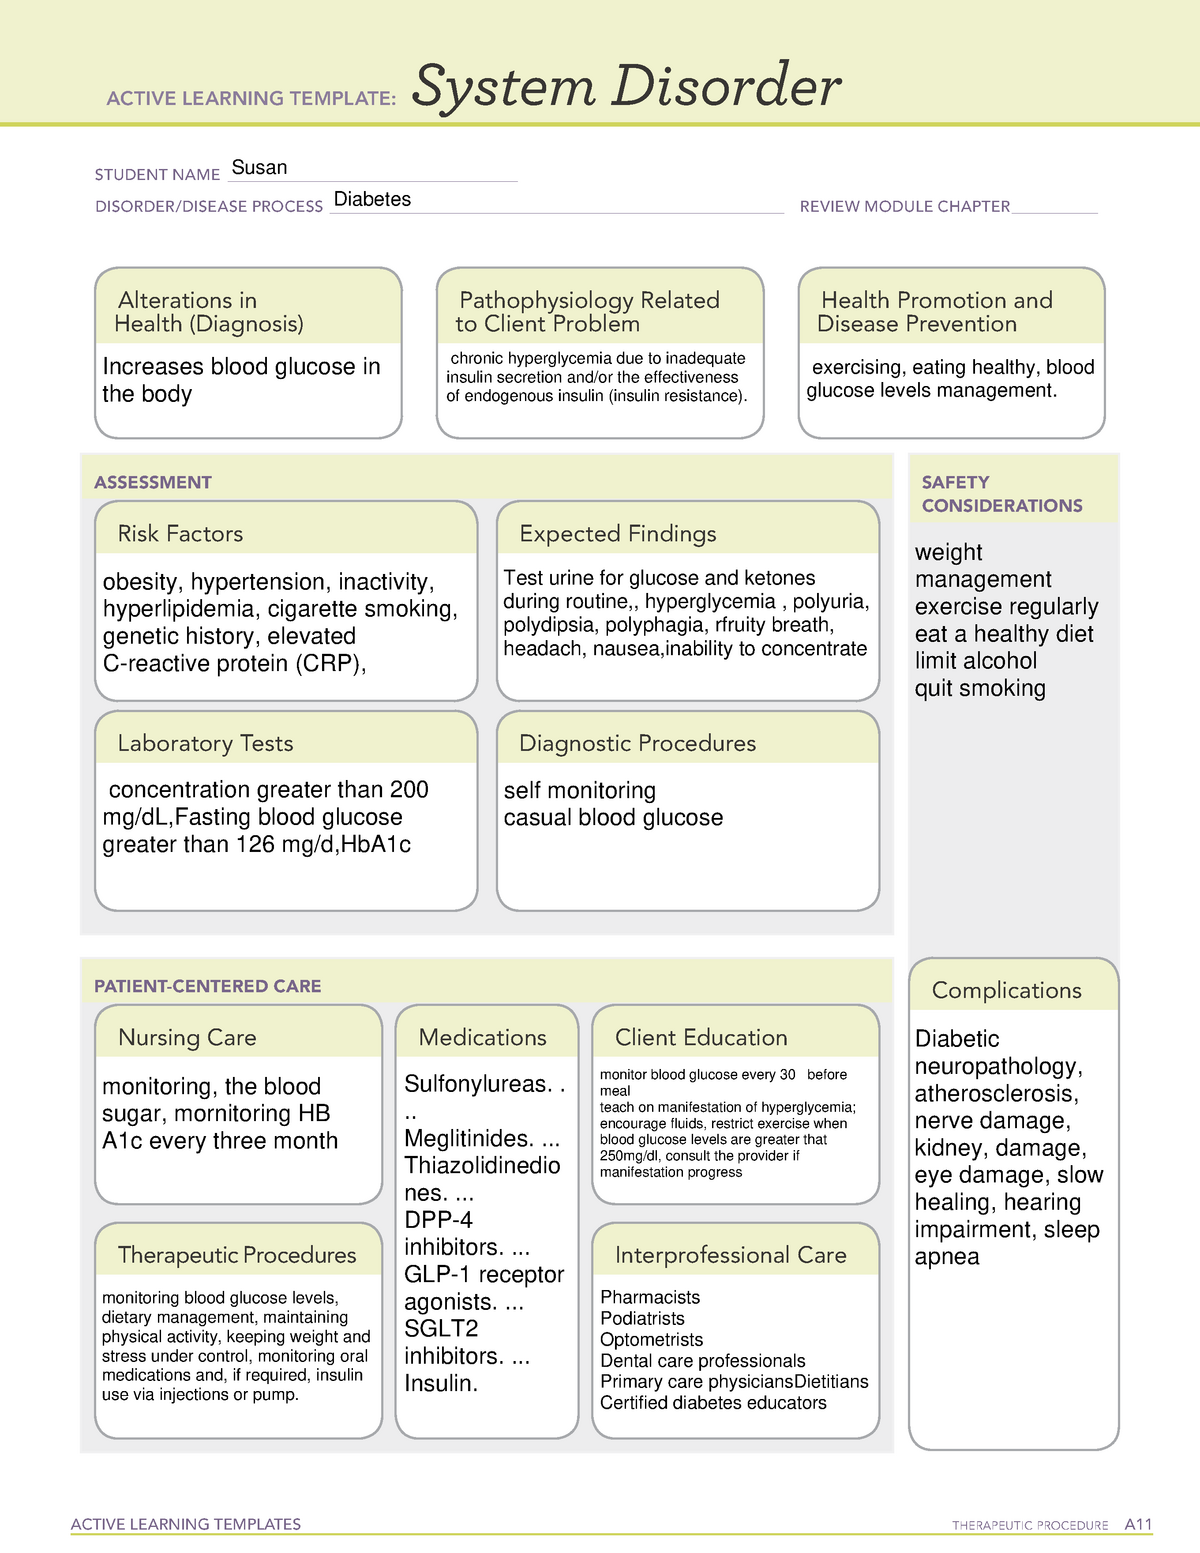 active-learning-template-sys-dis-7-active-learning-templates-therapeutic-procedure-a-system